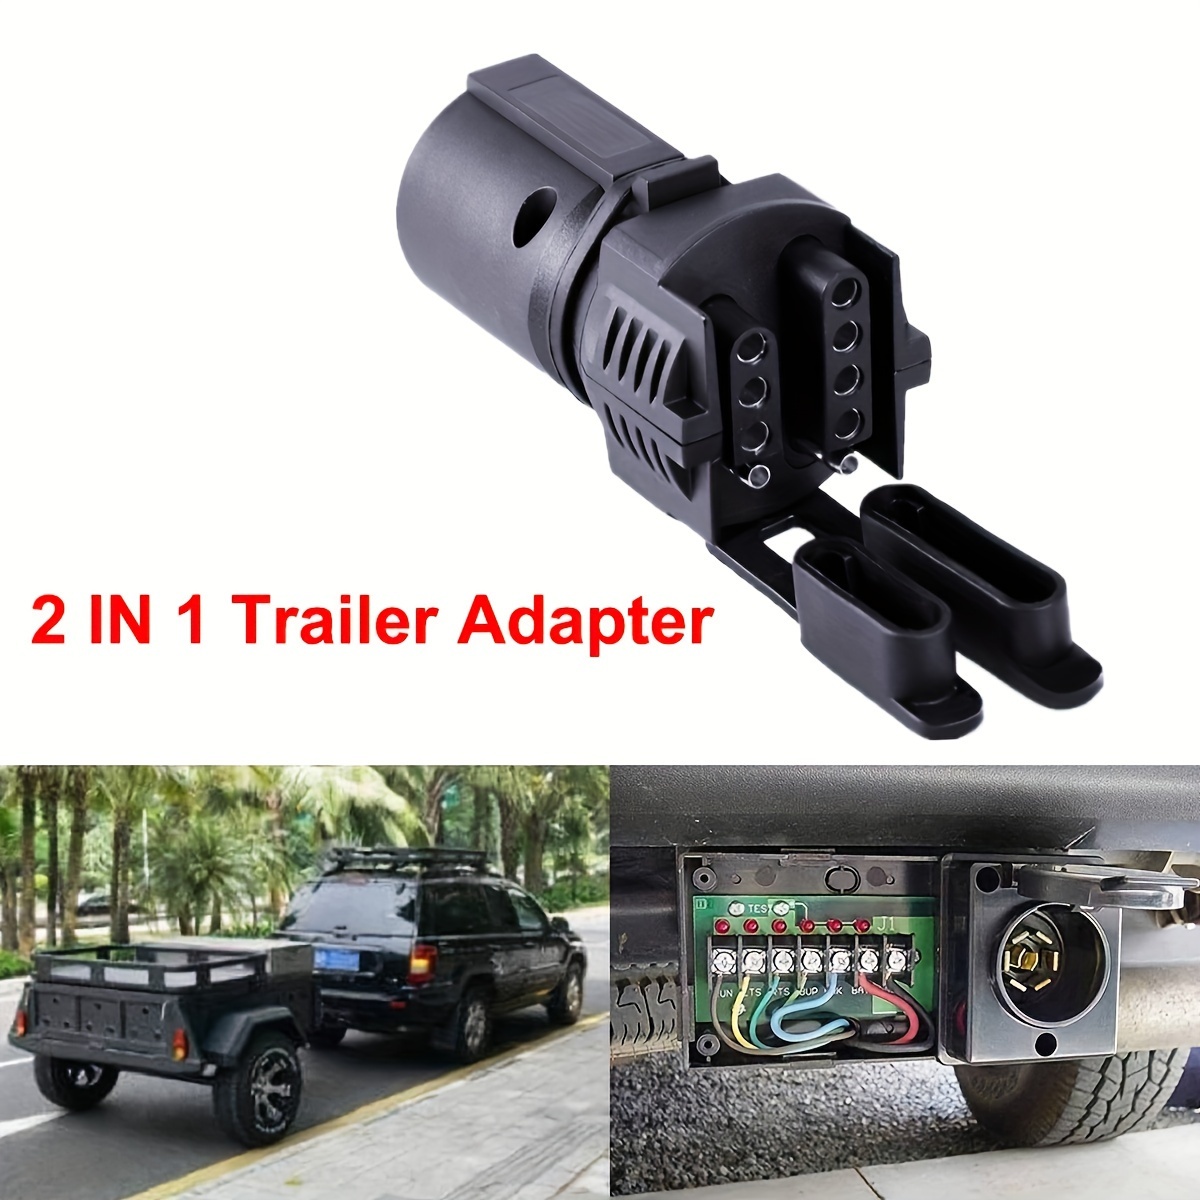 

7-pin Round To 4-pin And 5-pin Flat Blade Trailer Adapters For All Types Of Vehicles Without Damaging The Vehicle - Easily To Connect Your Trailer